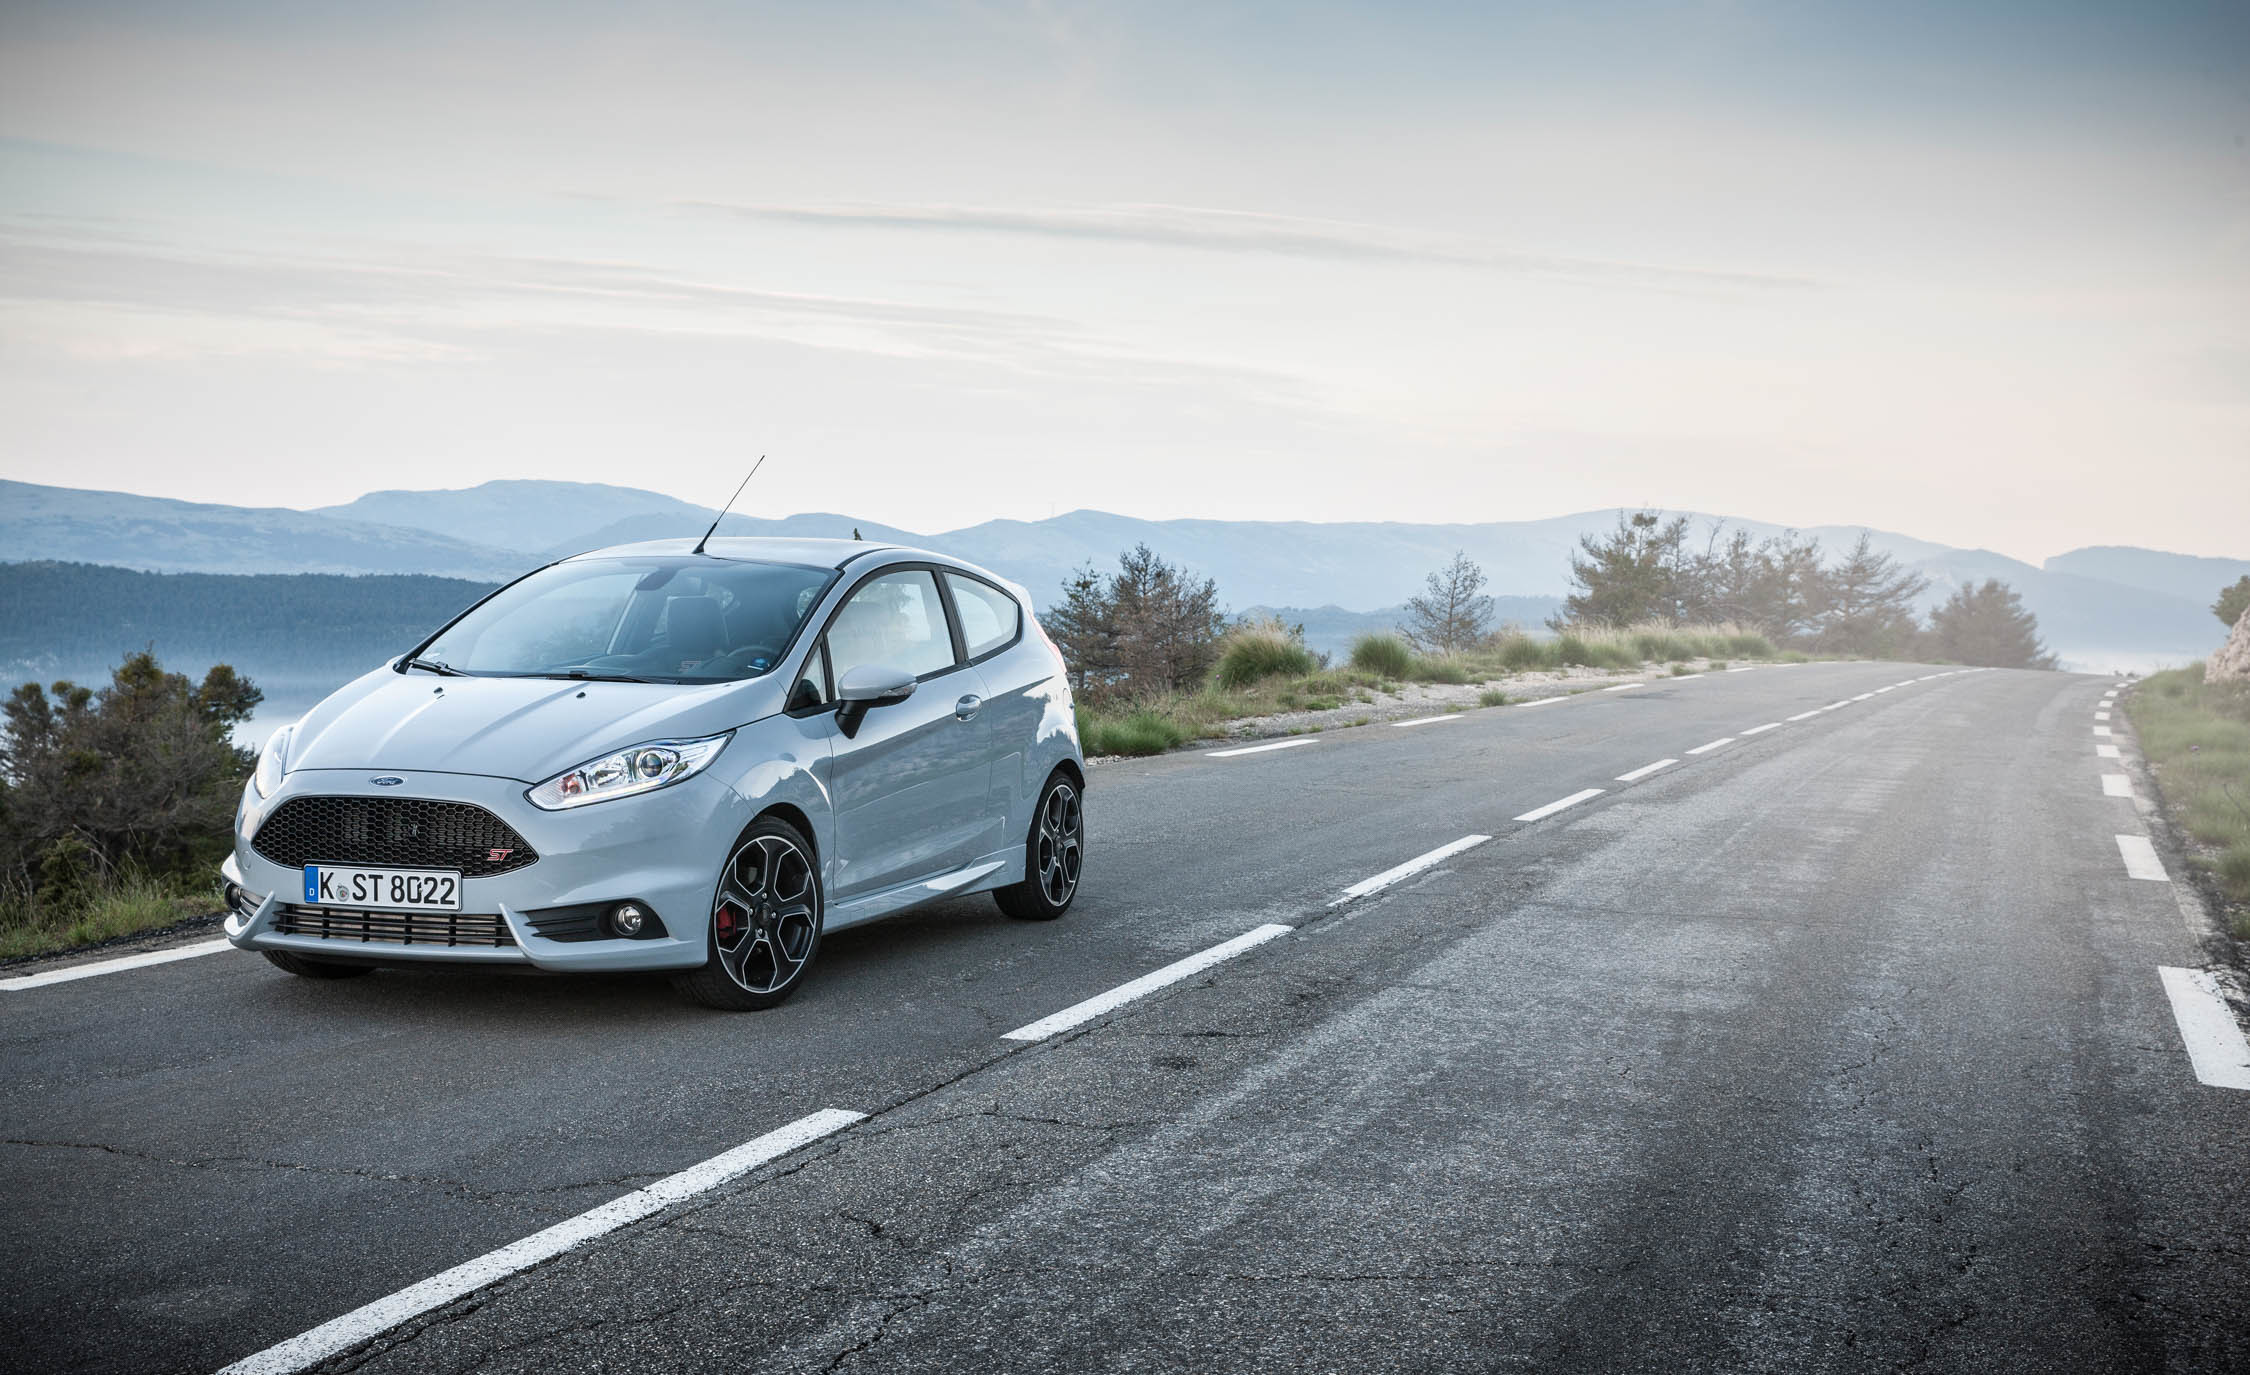 2017 Ford Fiesta St Photo 13 Of 25 2250x1375